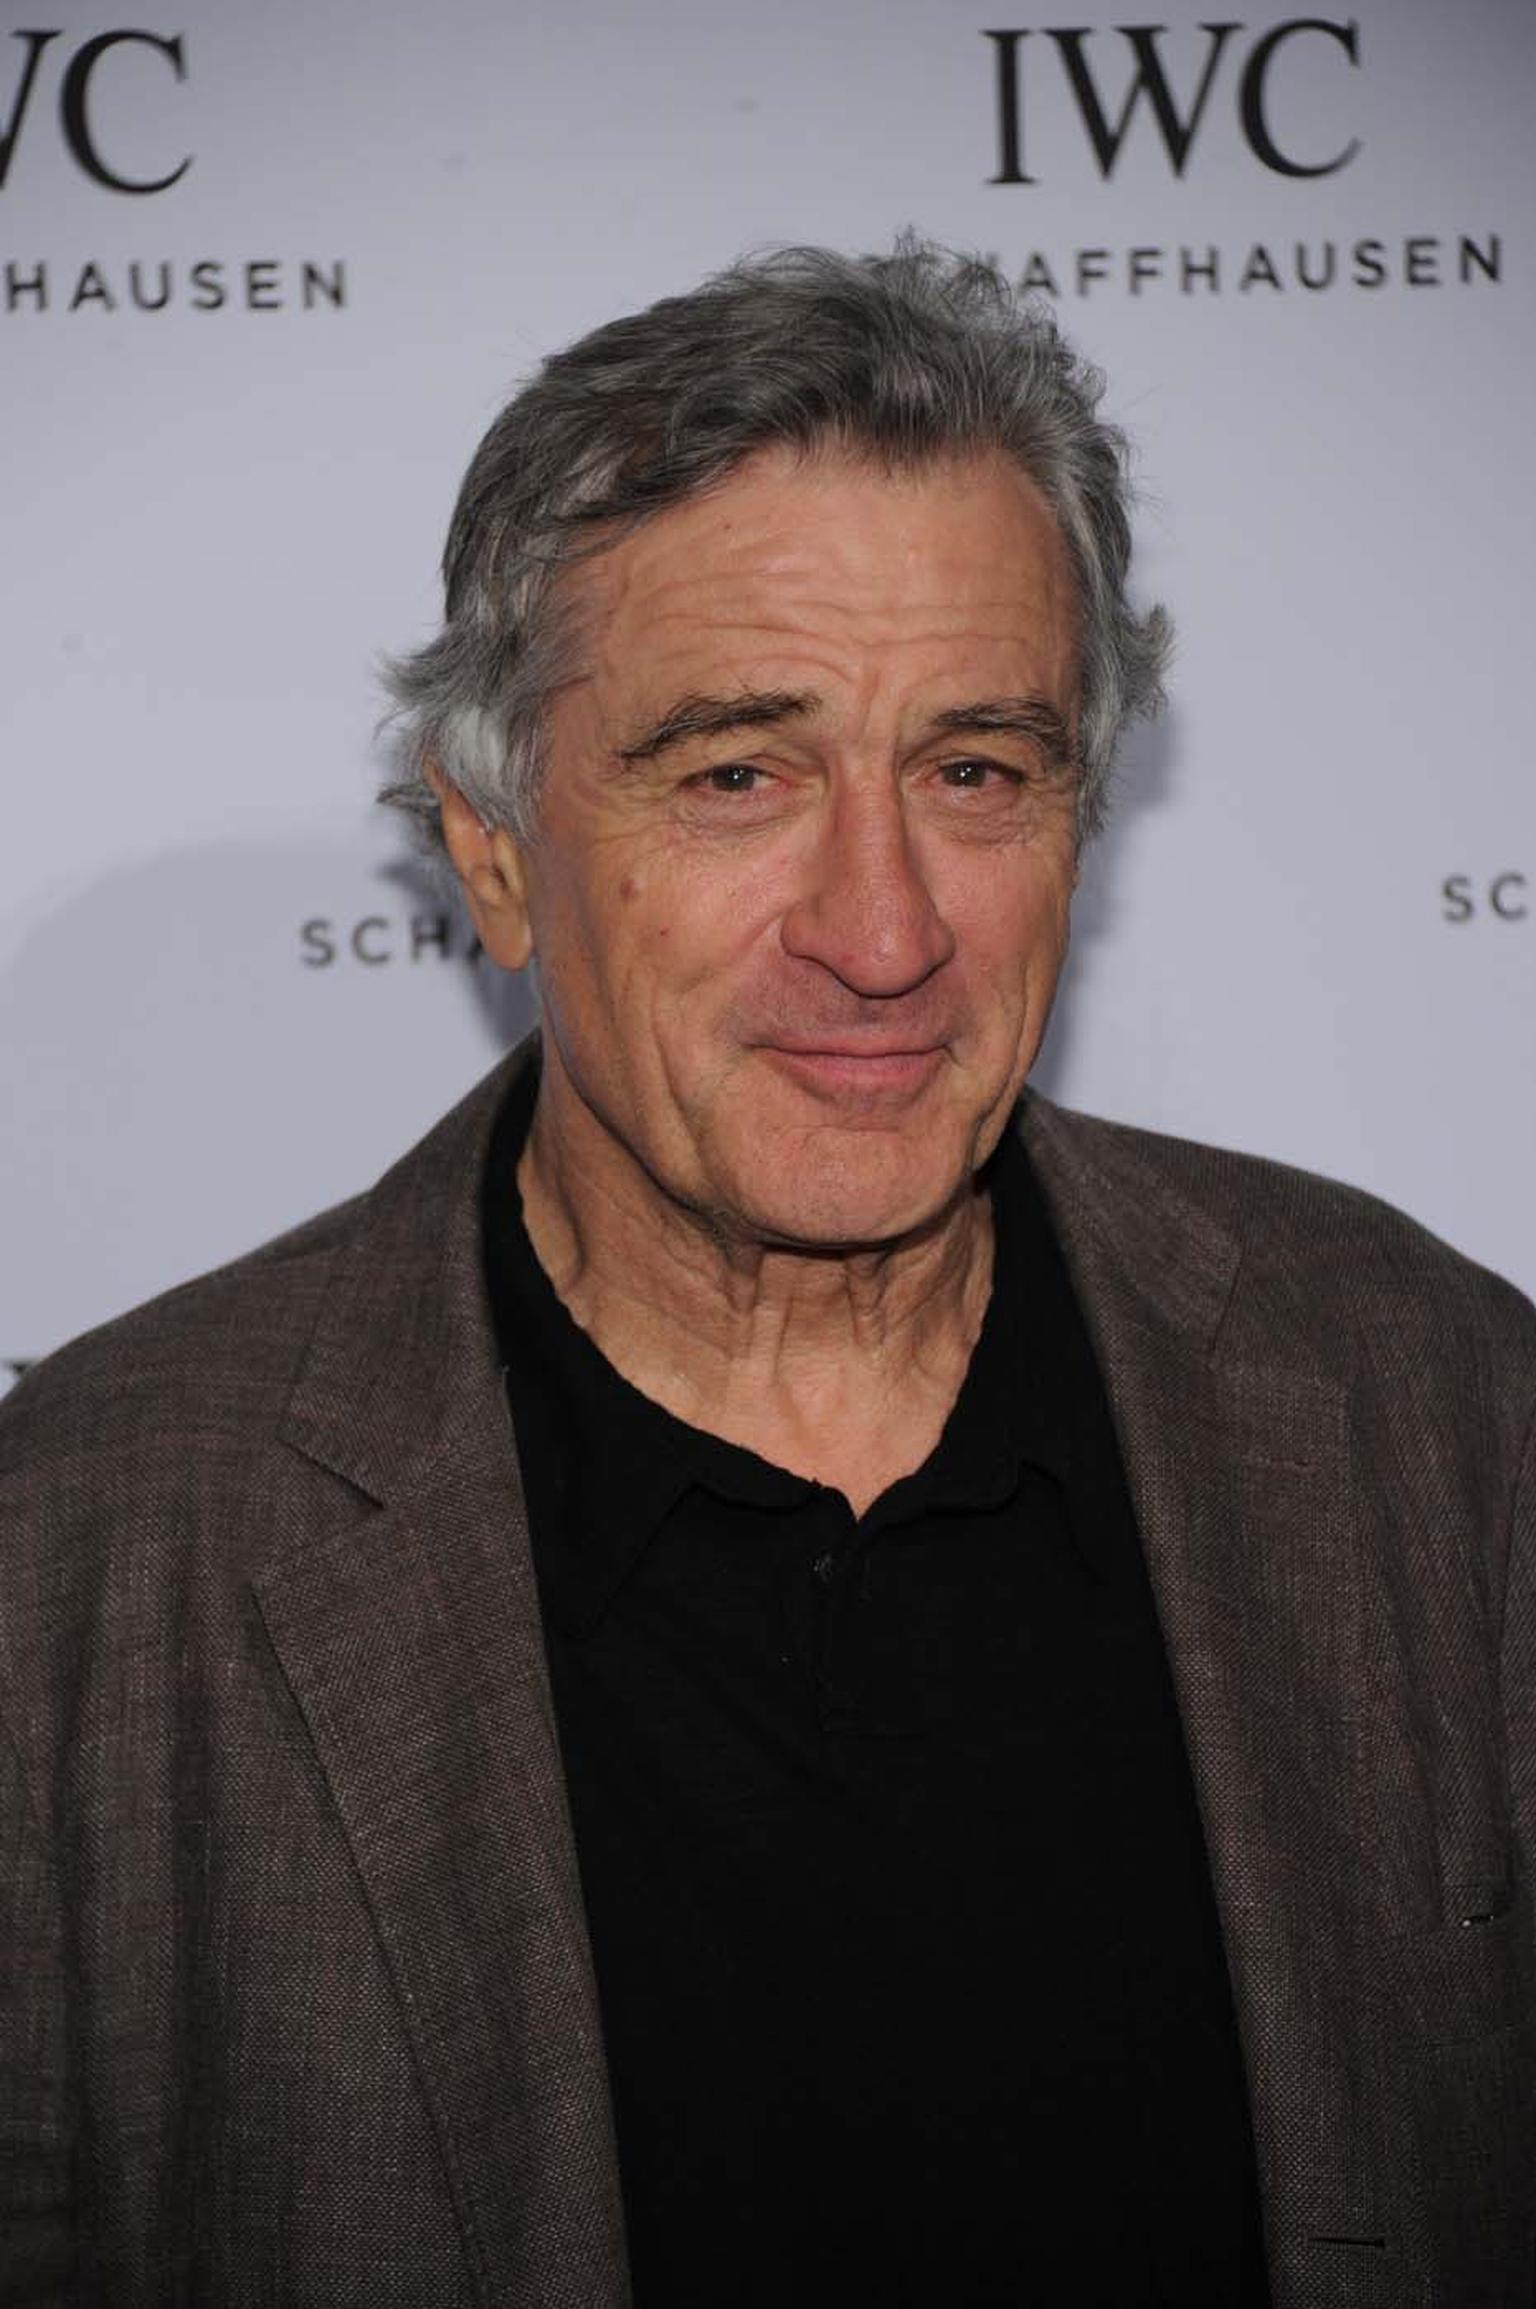 Actor Robert De Niro attends the IWC For the Love of Cinema event during the 2013 Tribeca Film Festival. Image by: IWC/David M. Benett.